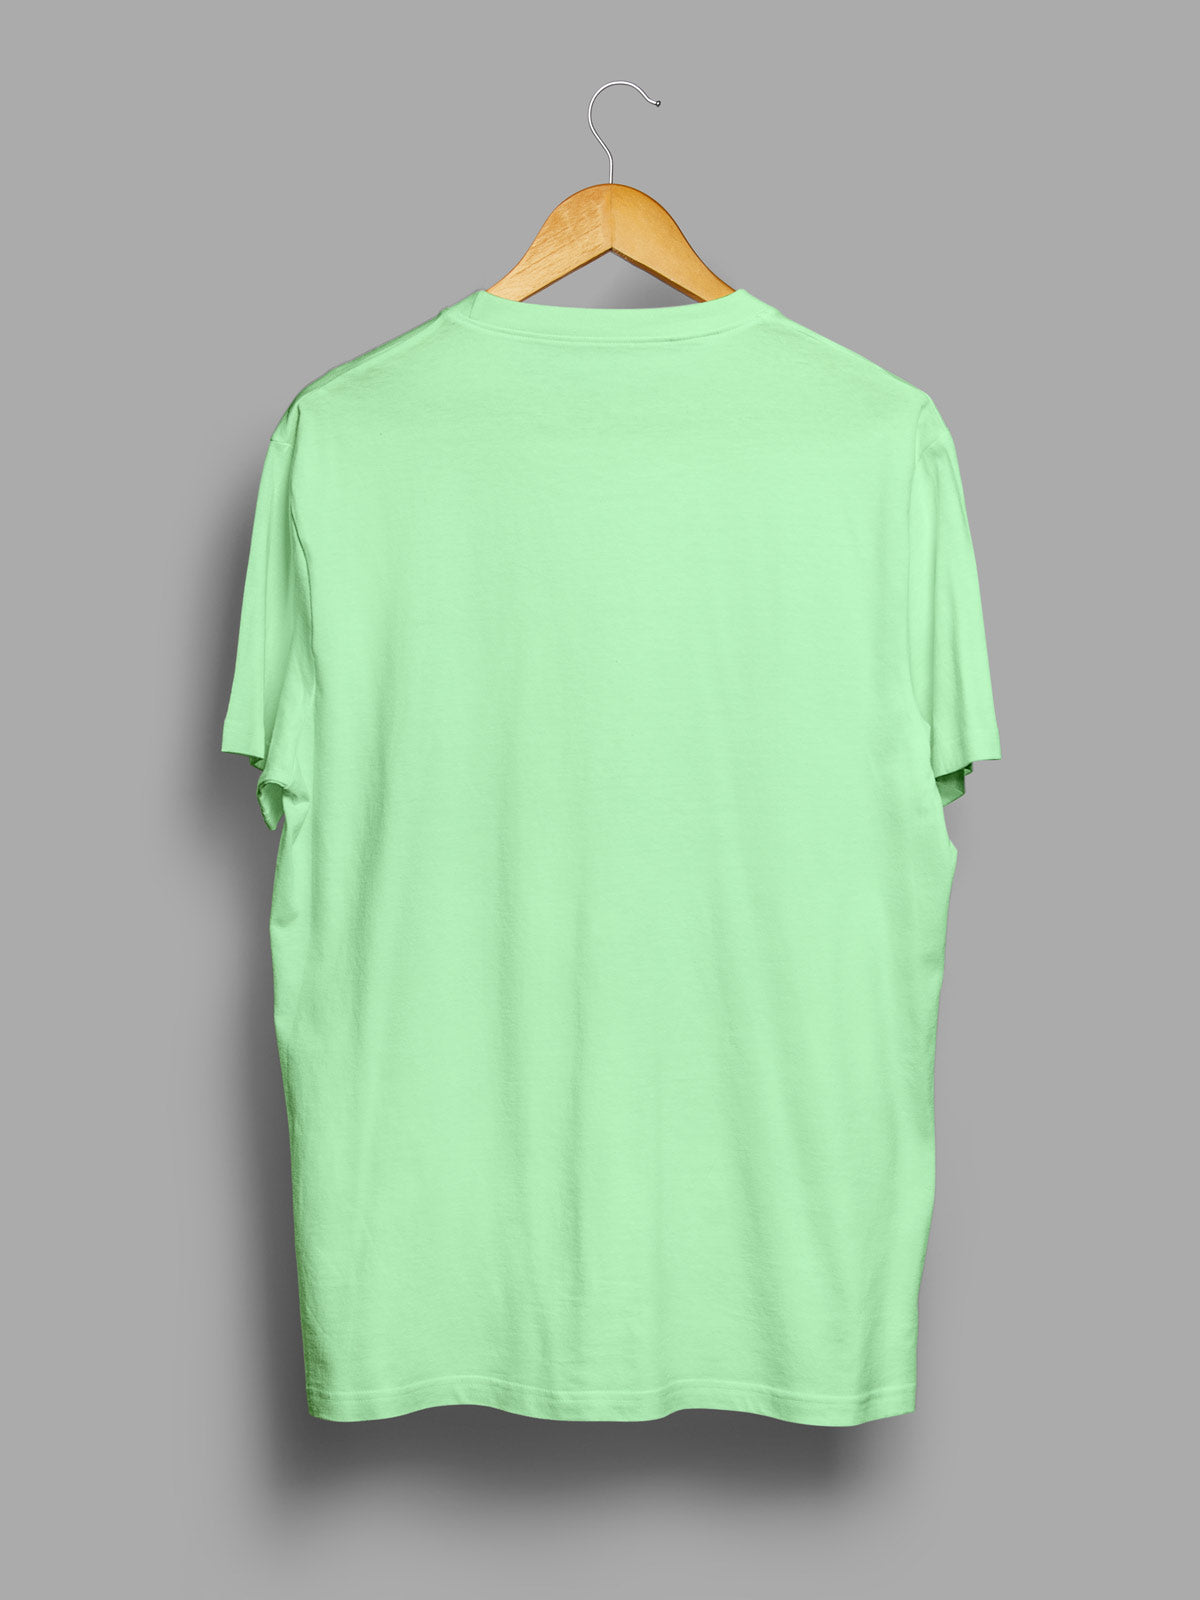 Electric-mint-t-shirt-for-men by Ghumakkad